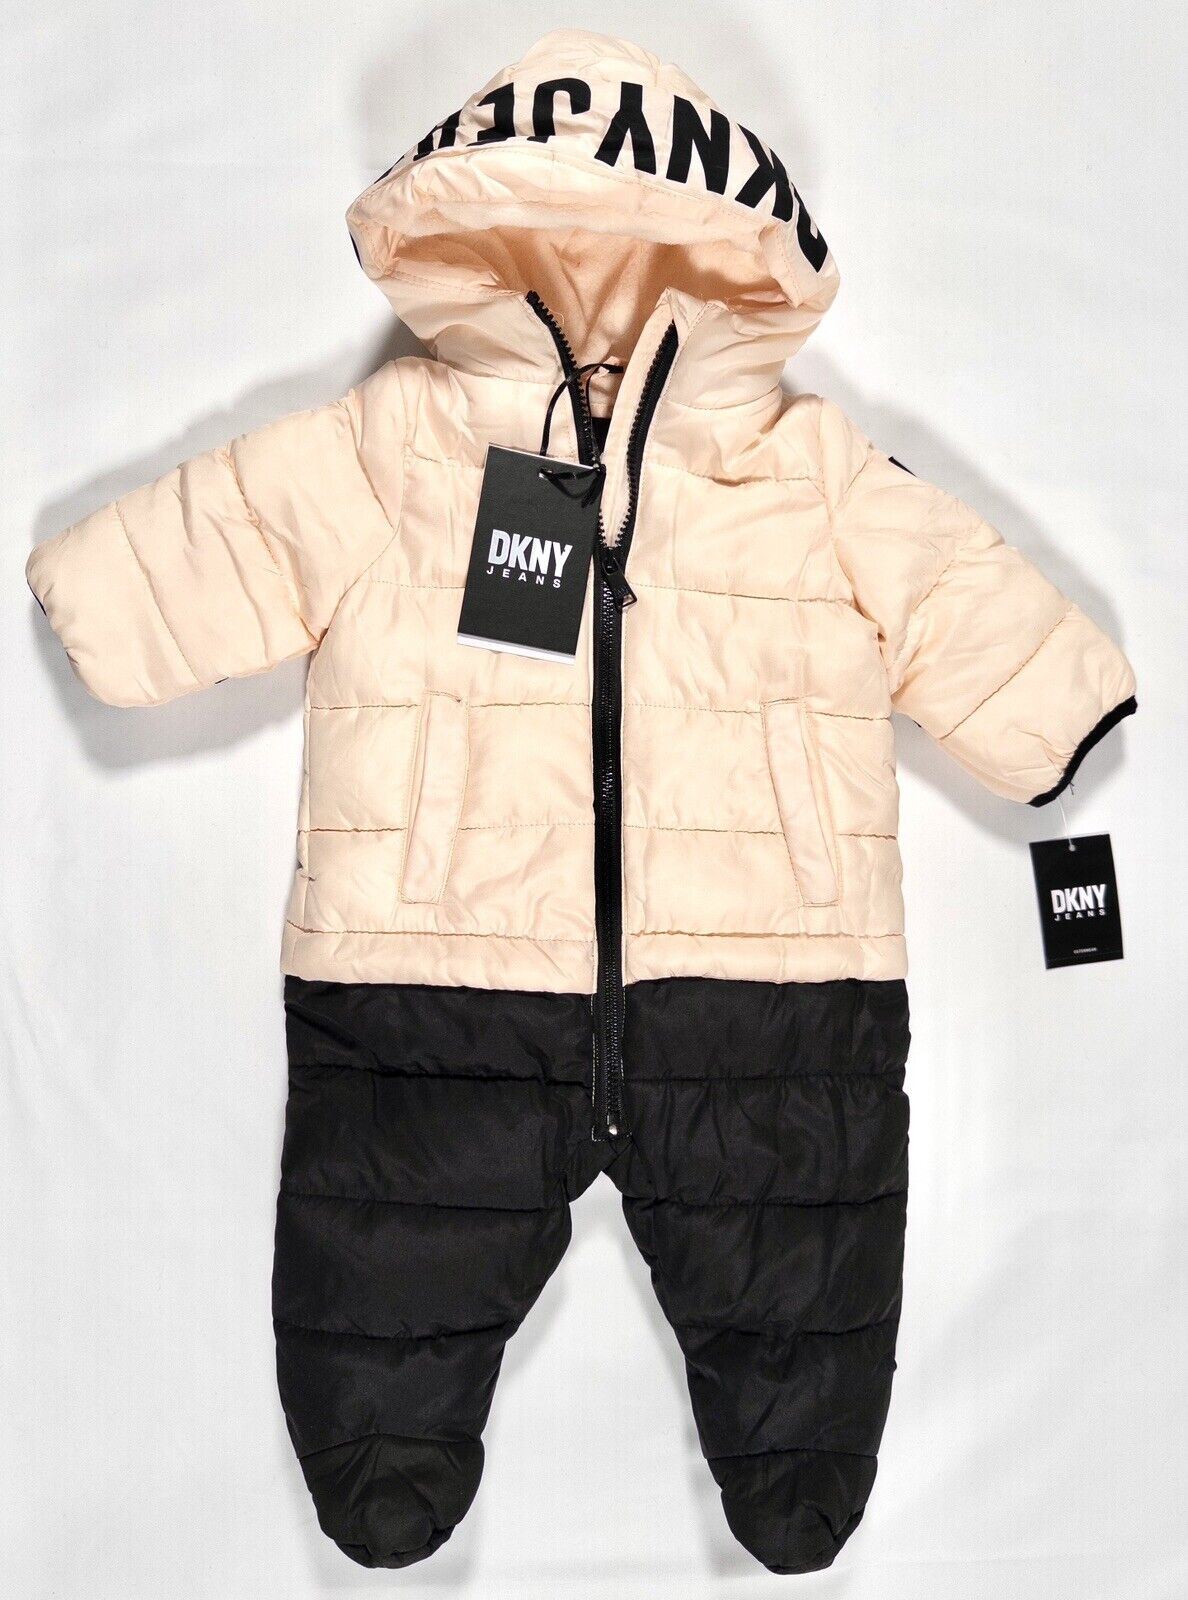 DKNY JEANS Baby Girls All in One Snowsuit Pink Black Size UK 3-6 Months